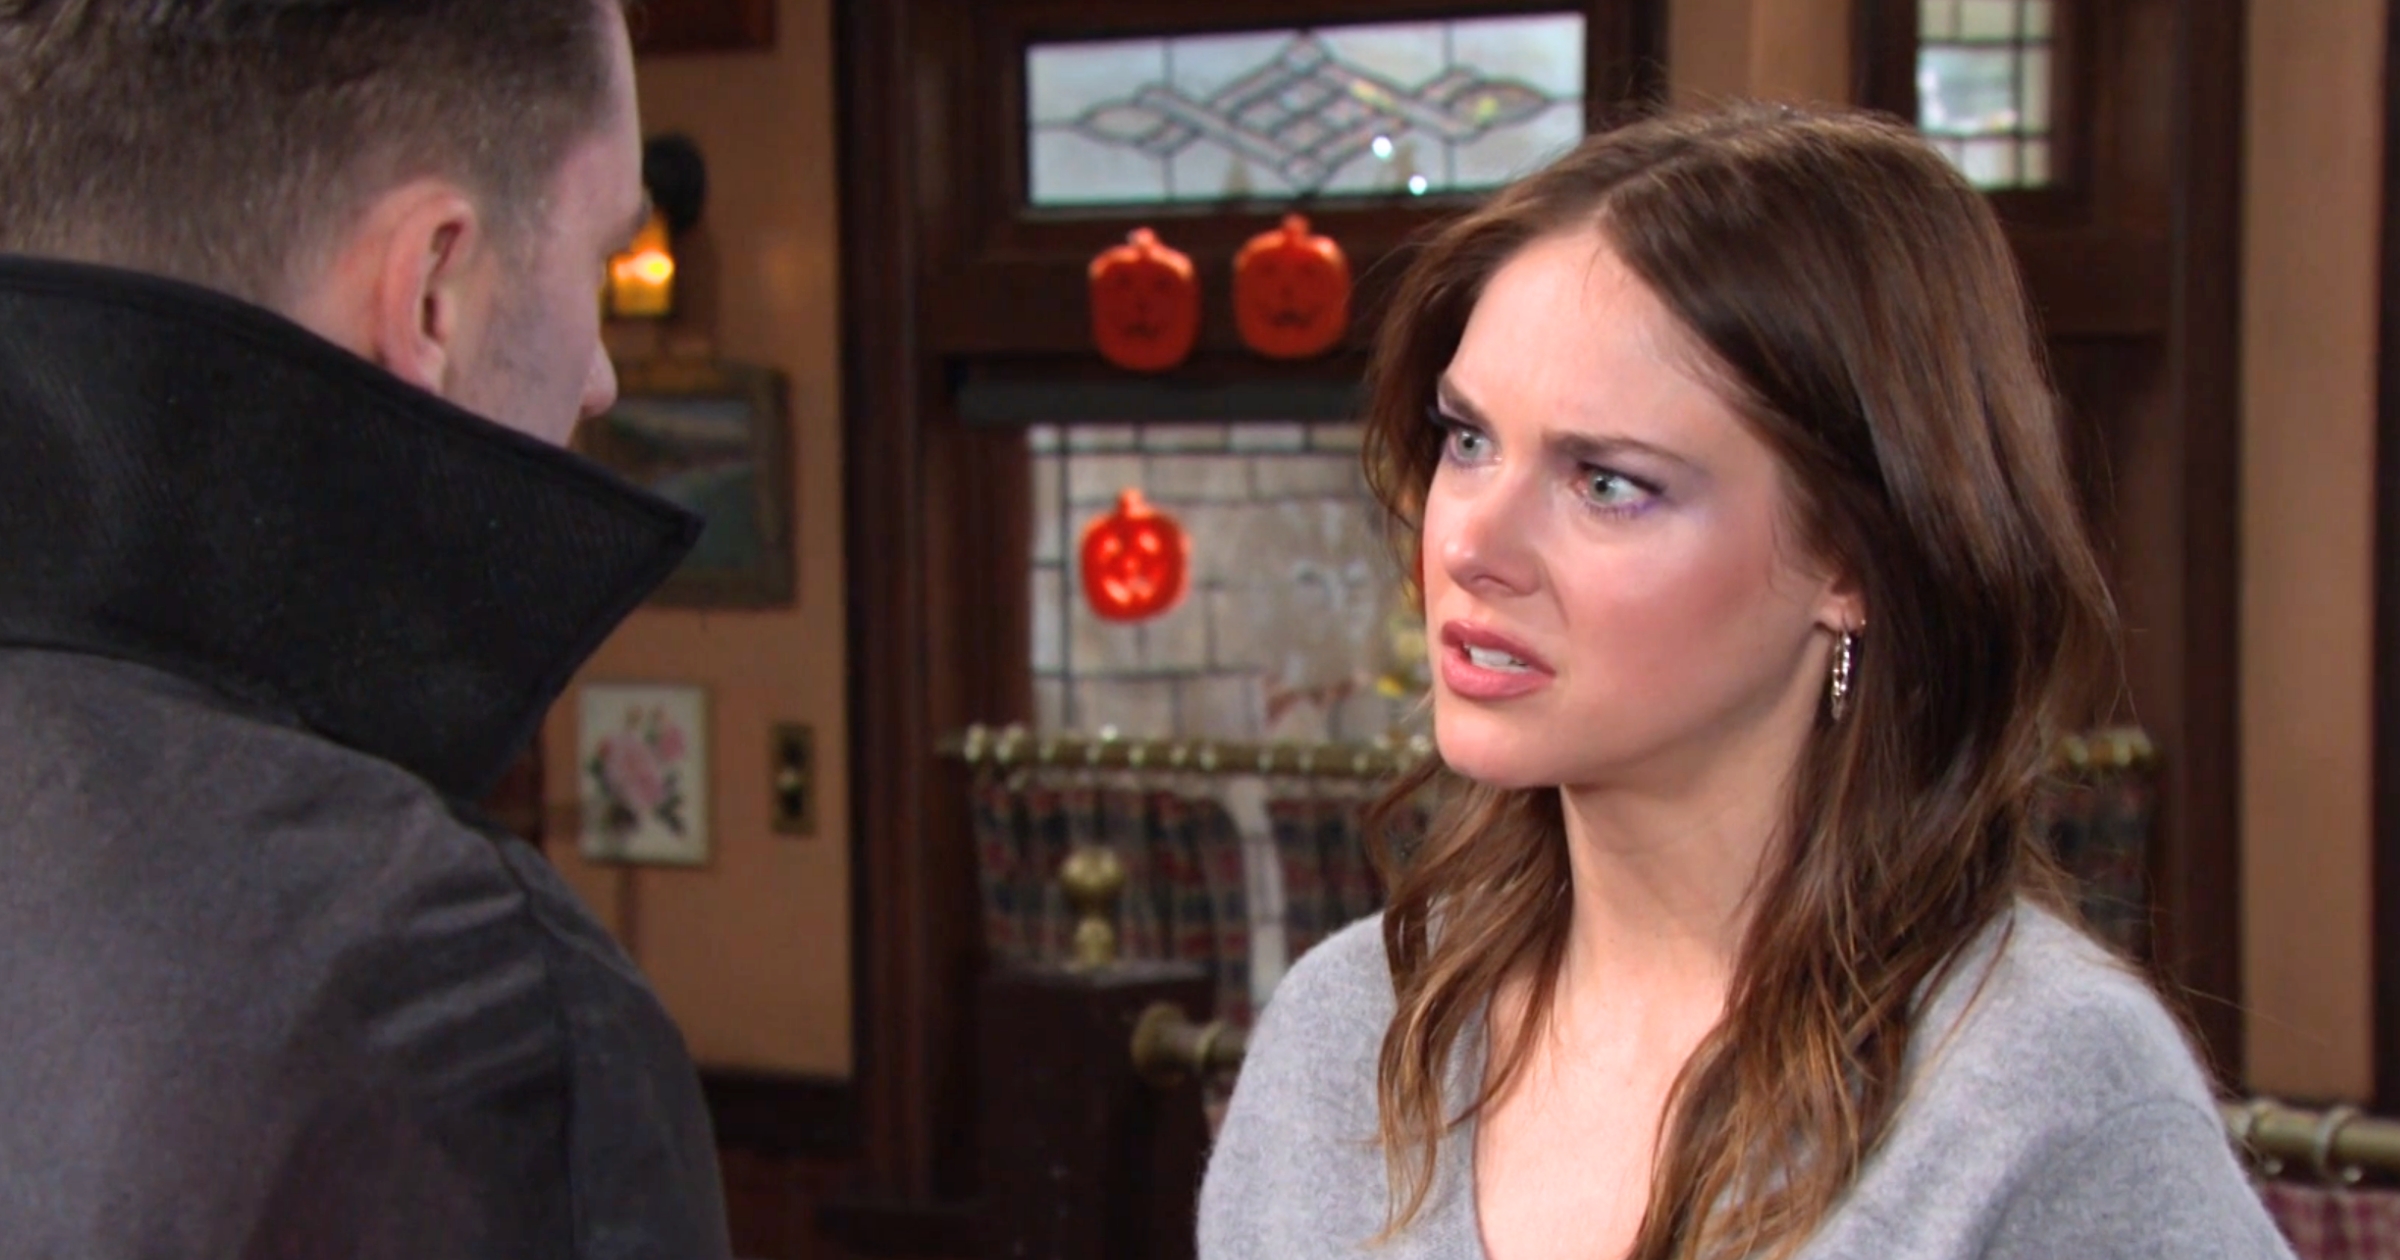 Days of Our Lives - Oct 26 - Chad and Stephanie